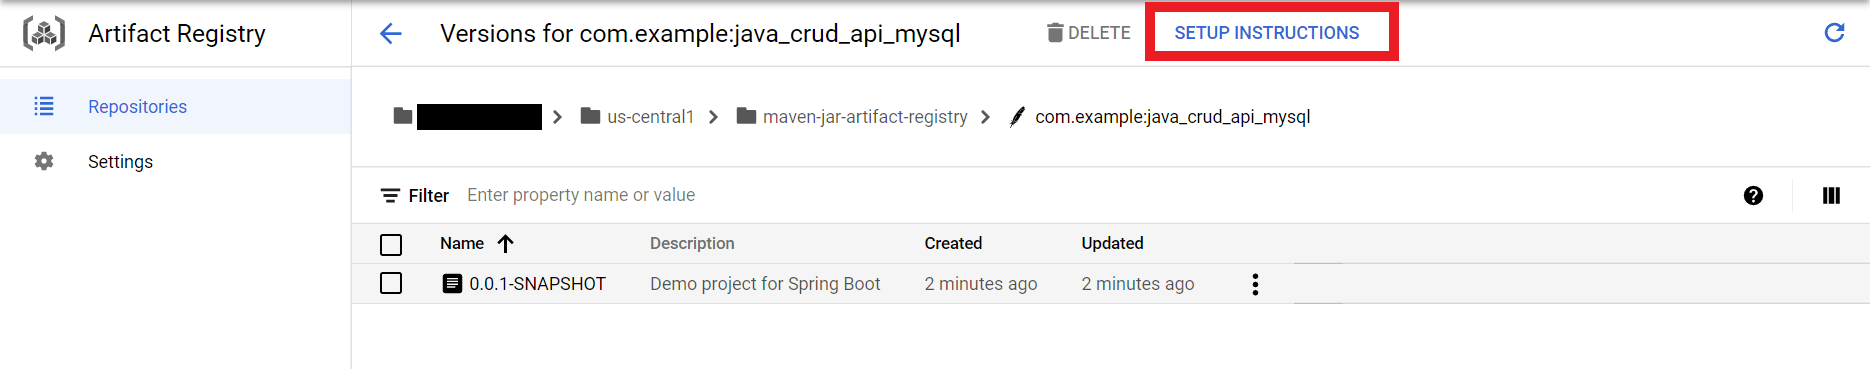 Setup Instructions for Adding Maven Jar File to Other Projects